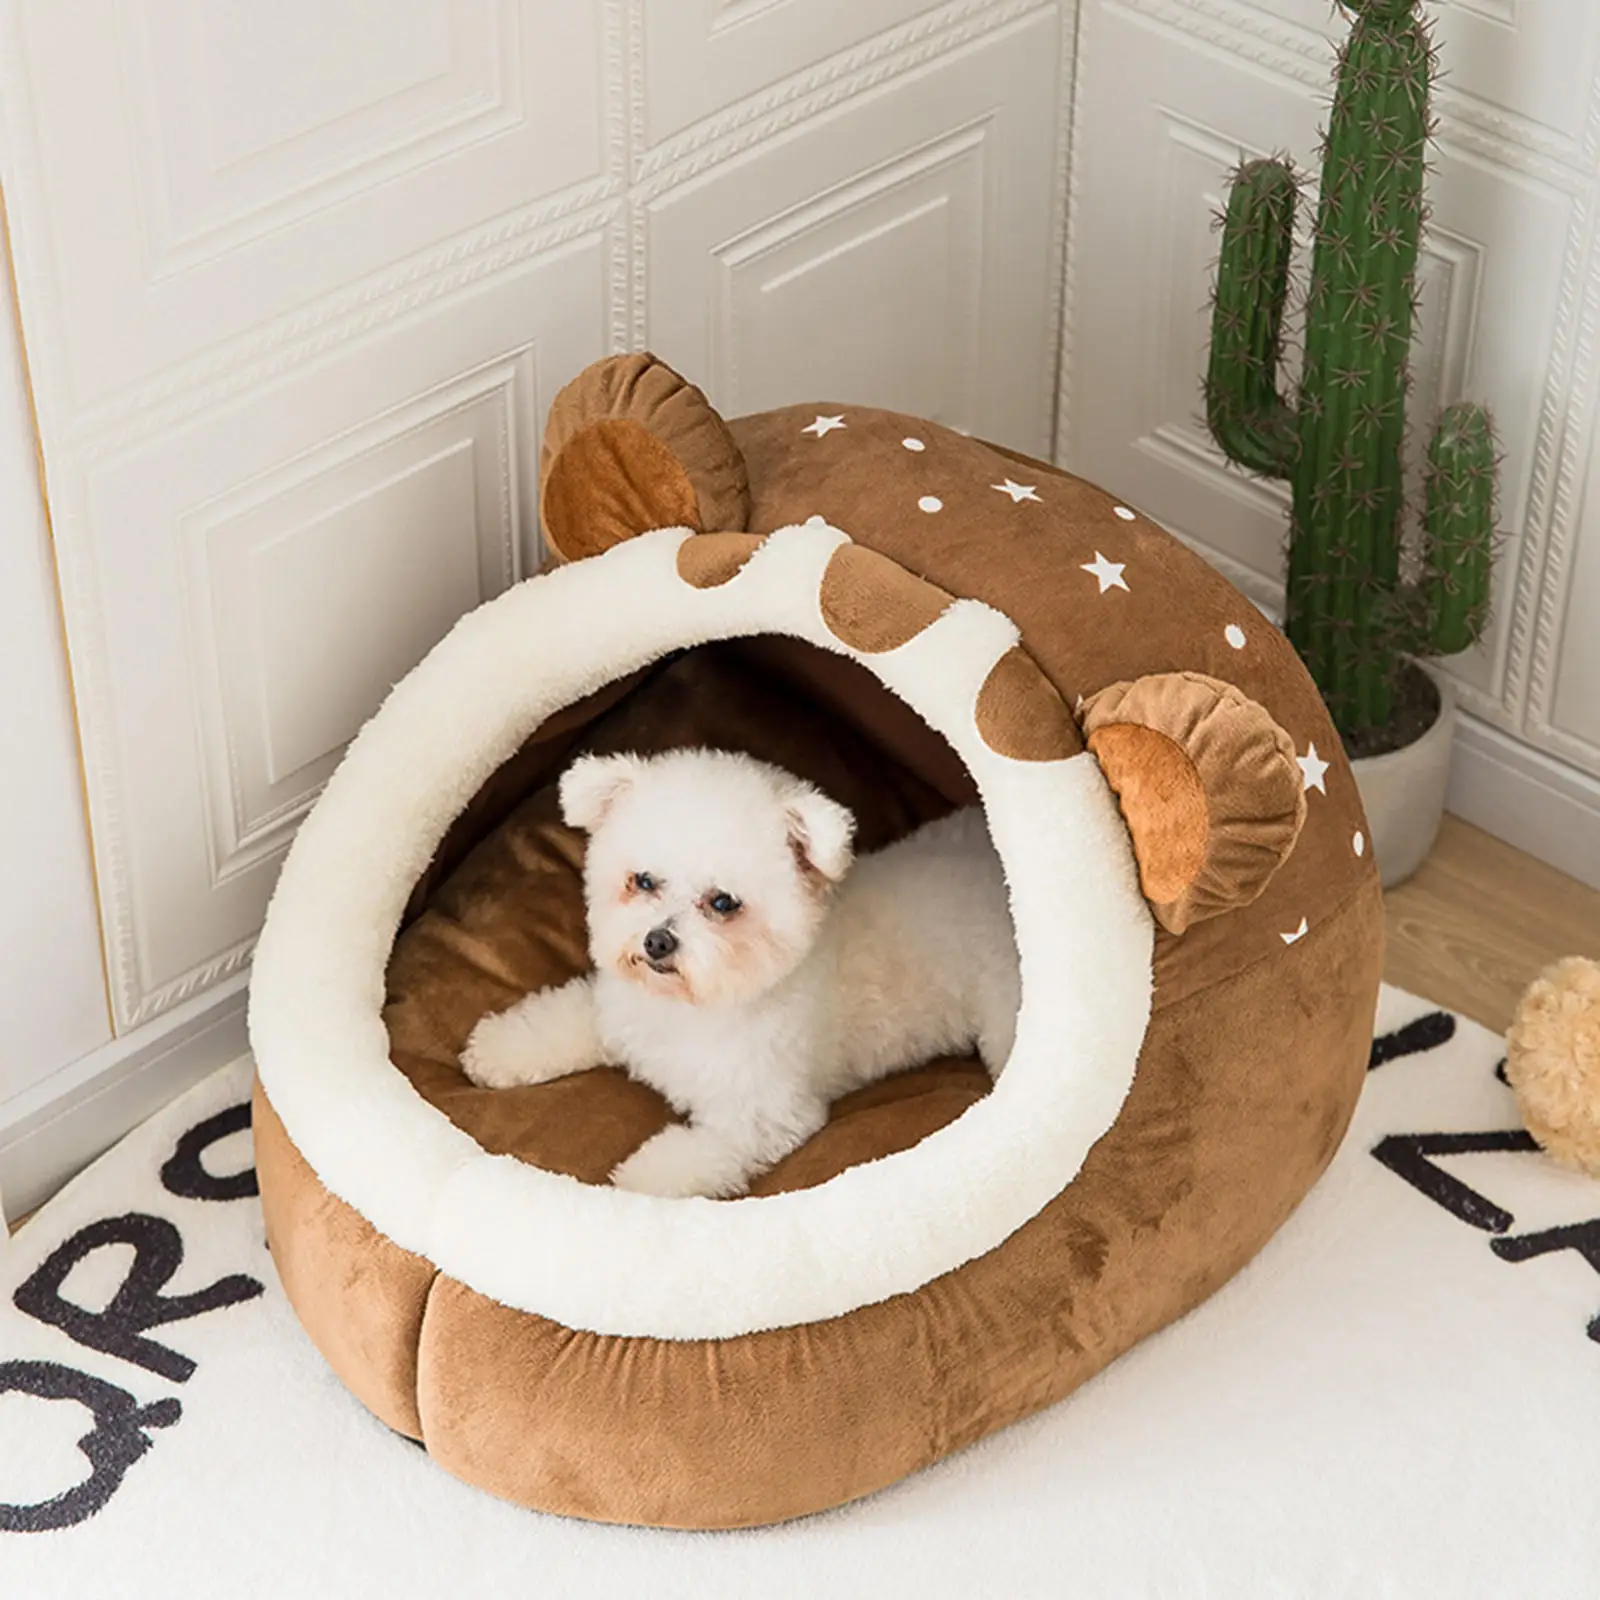 Fashion Dog Beds Winter Warm Cat Nest Bed Puppy Cats Soft Cat House Tent Pet Beds for Dogs Nest Pet Sleeping Bed Pet Supplies